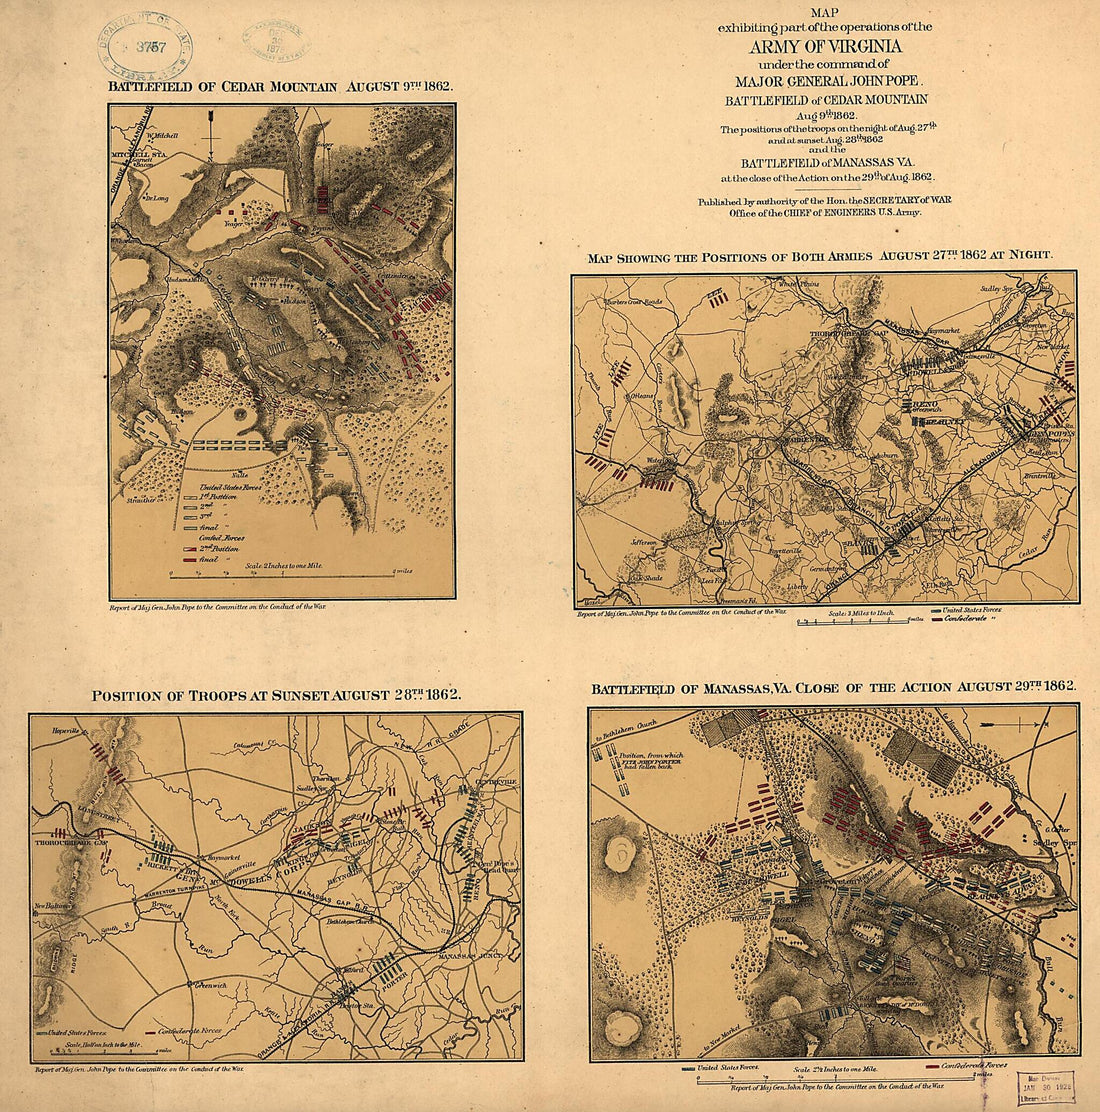 This old map of Maps Exhibiting Part of the Operations of the Army of Virginia Under the Command of Major General John Pope. Battlefield of Cedar Mountain, Aug. 9th from 1862. the Positions of the Troops On the Night of Aug. 27th and at Sunset Aug. 28th 